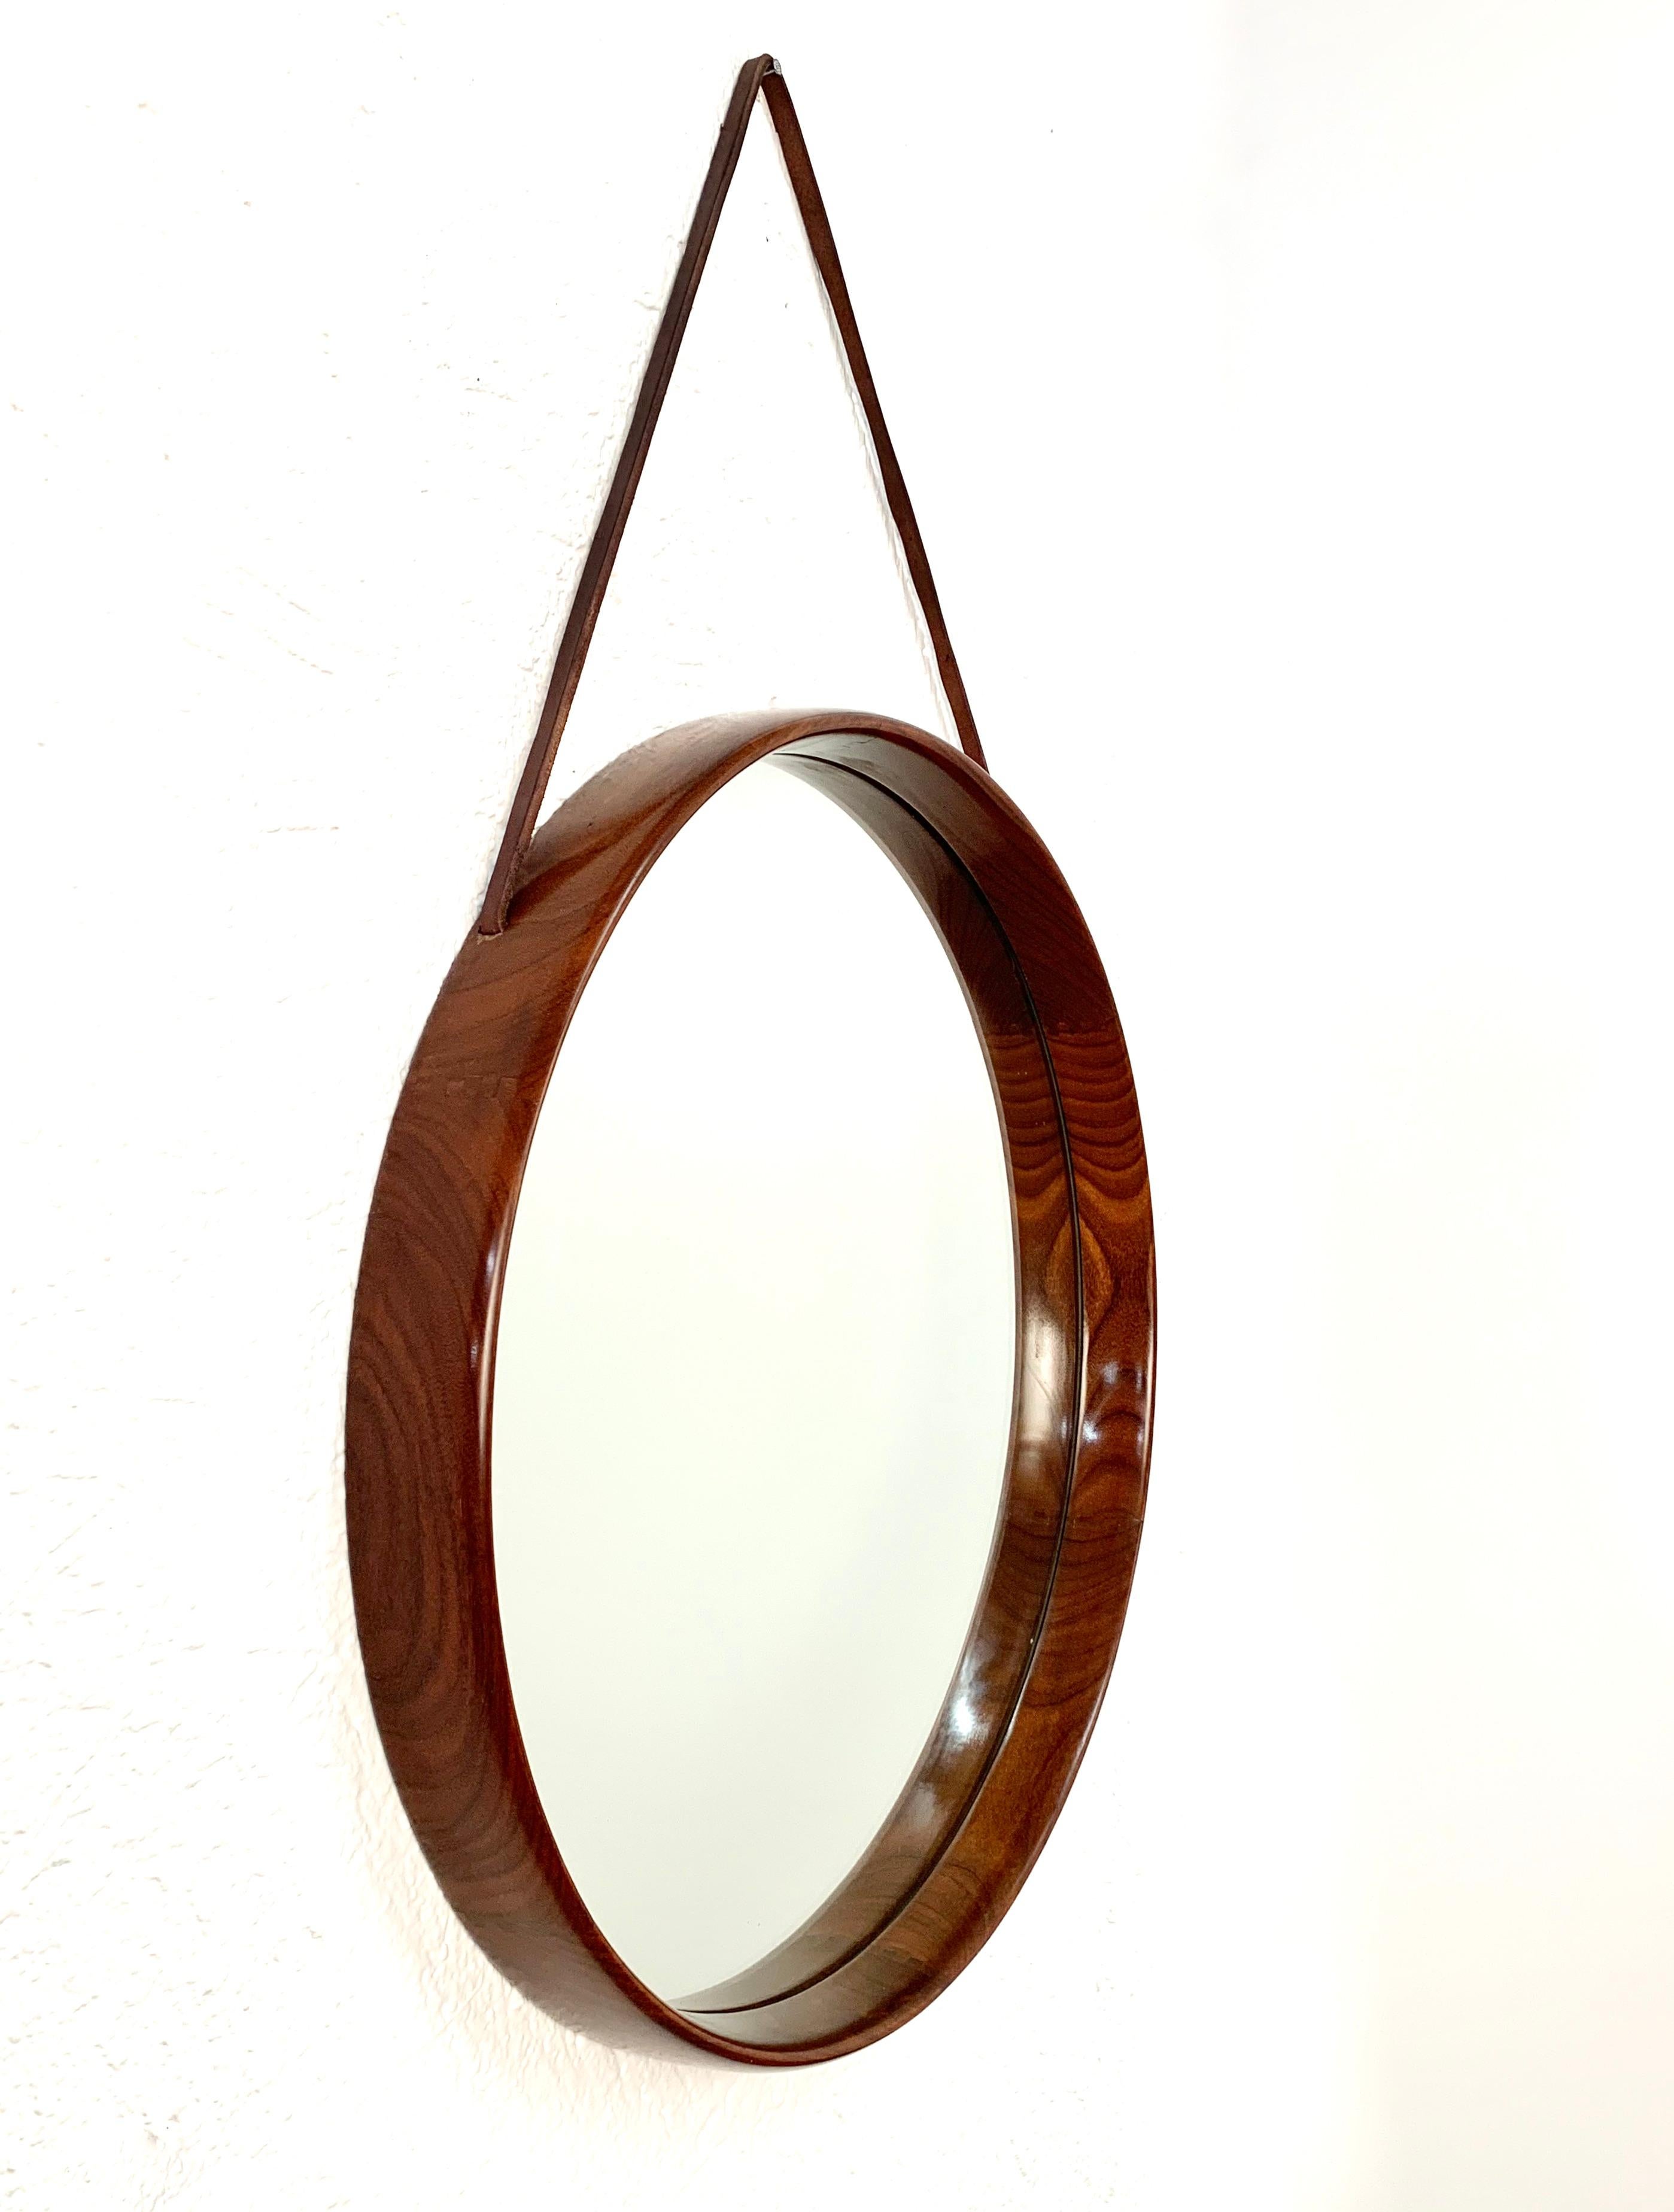 20th Century Teak and Leather Uno & Östen Kristiansson Swedish Wall Mirror for Luxus, 1960s For Sale